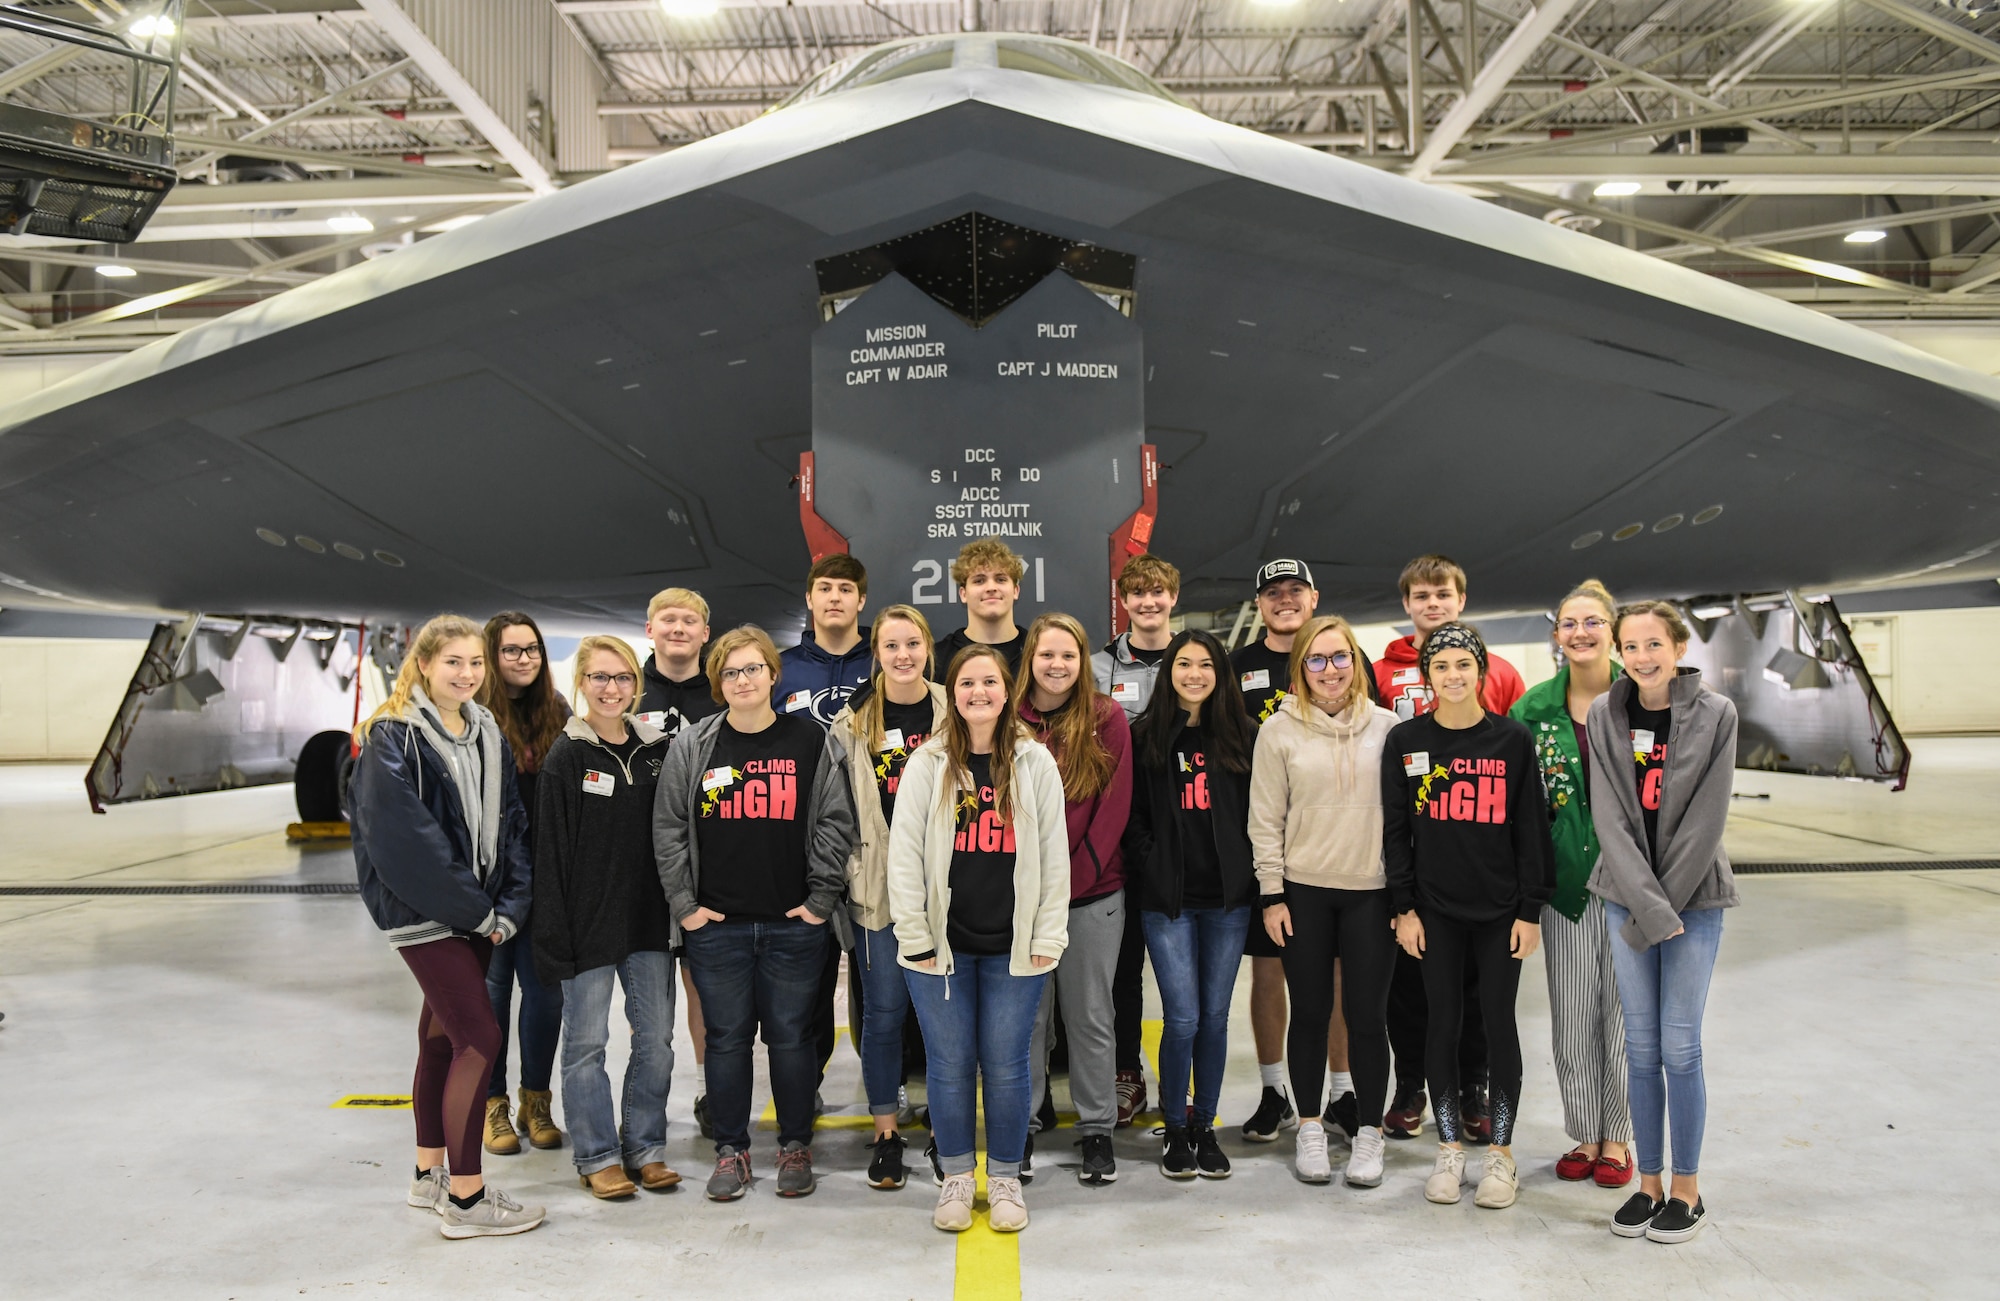 Warrensburg High School students who are part of the 2020 Community Leadership and Involvement Means a Better Community High (CLIMB High) program stand for a photo during a tour at Whiteman Air Force Base, Mo., Jan. 29, 2020. The program began in 2007, since successfully graduating approximately 250. (U.S. Air Force photo by Staff Sgt. Sadie Colbert)